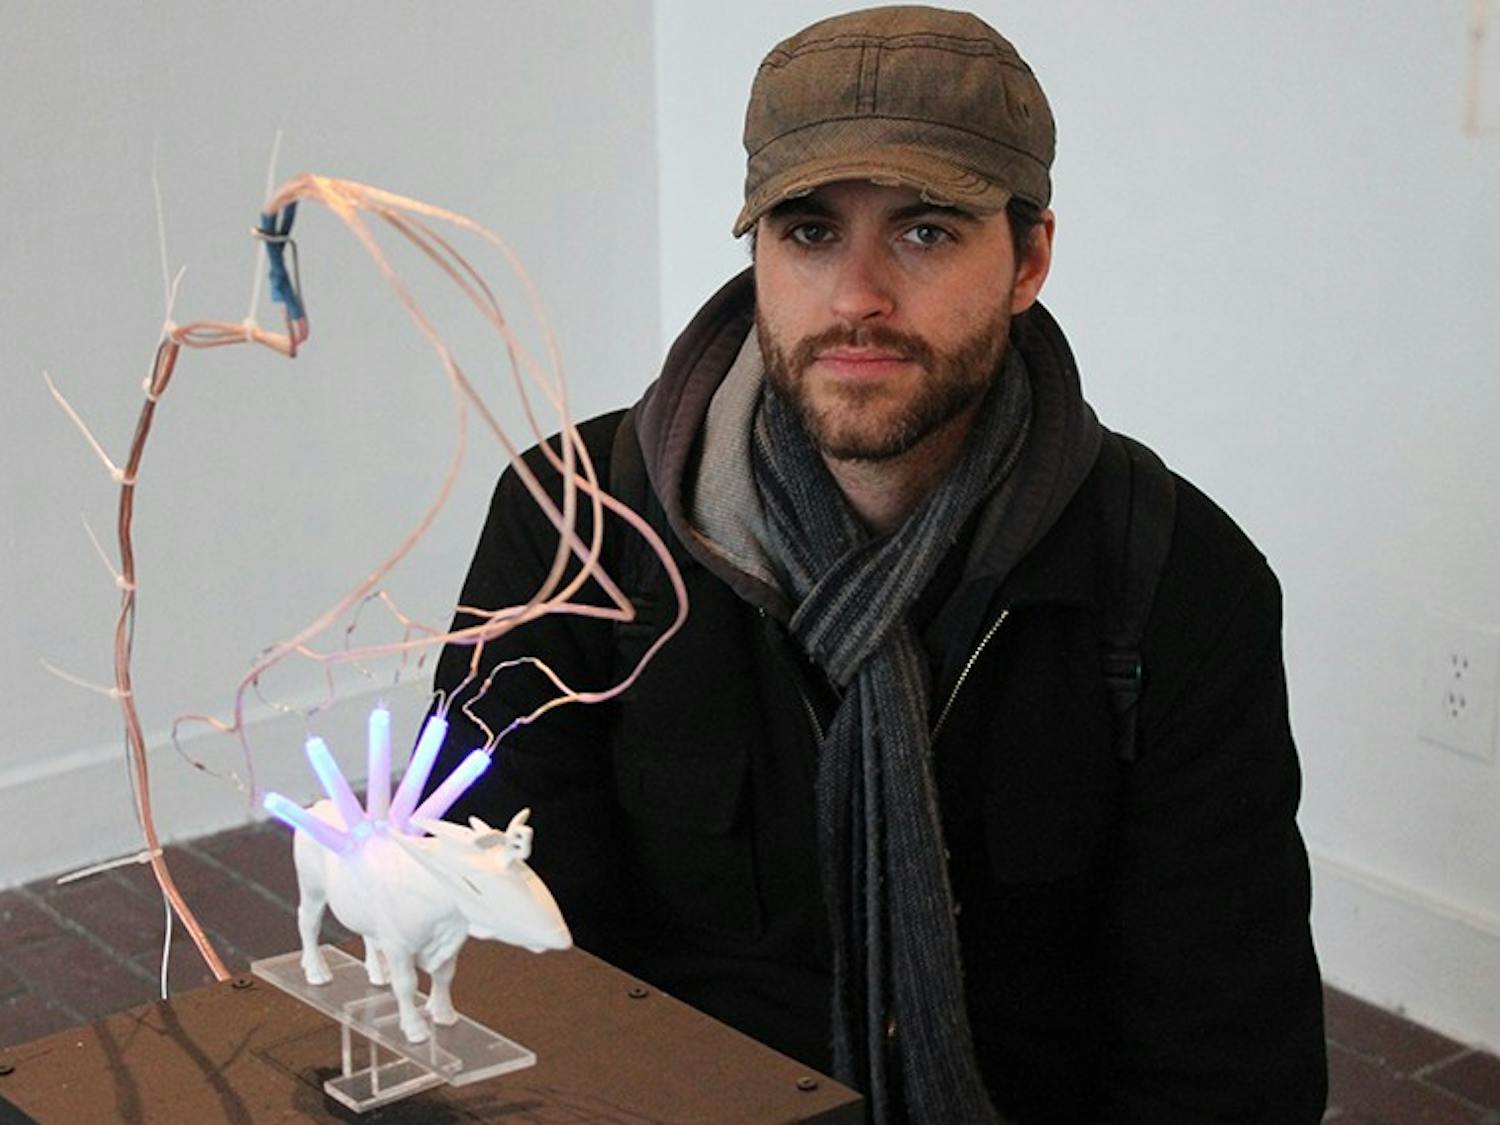 Lile Stephens is a MFA student at UNC-CH. His MFA thesis exhibition  "Operating Systems" is on display from February 10 - 14. There will be a reception, February 13, at 6pm for his exhibit. Stephens's favorite piece in his exhibit was his cow statue.